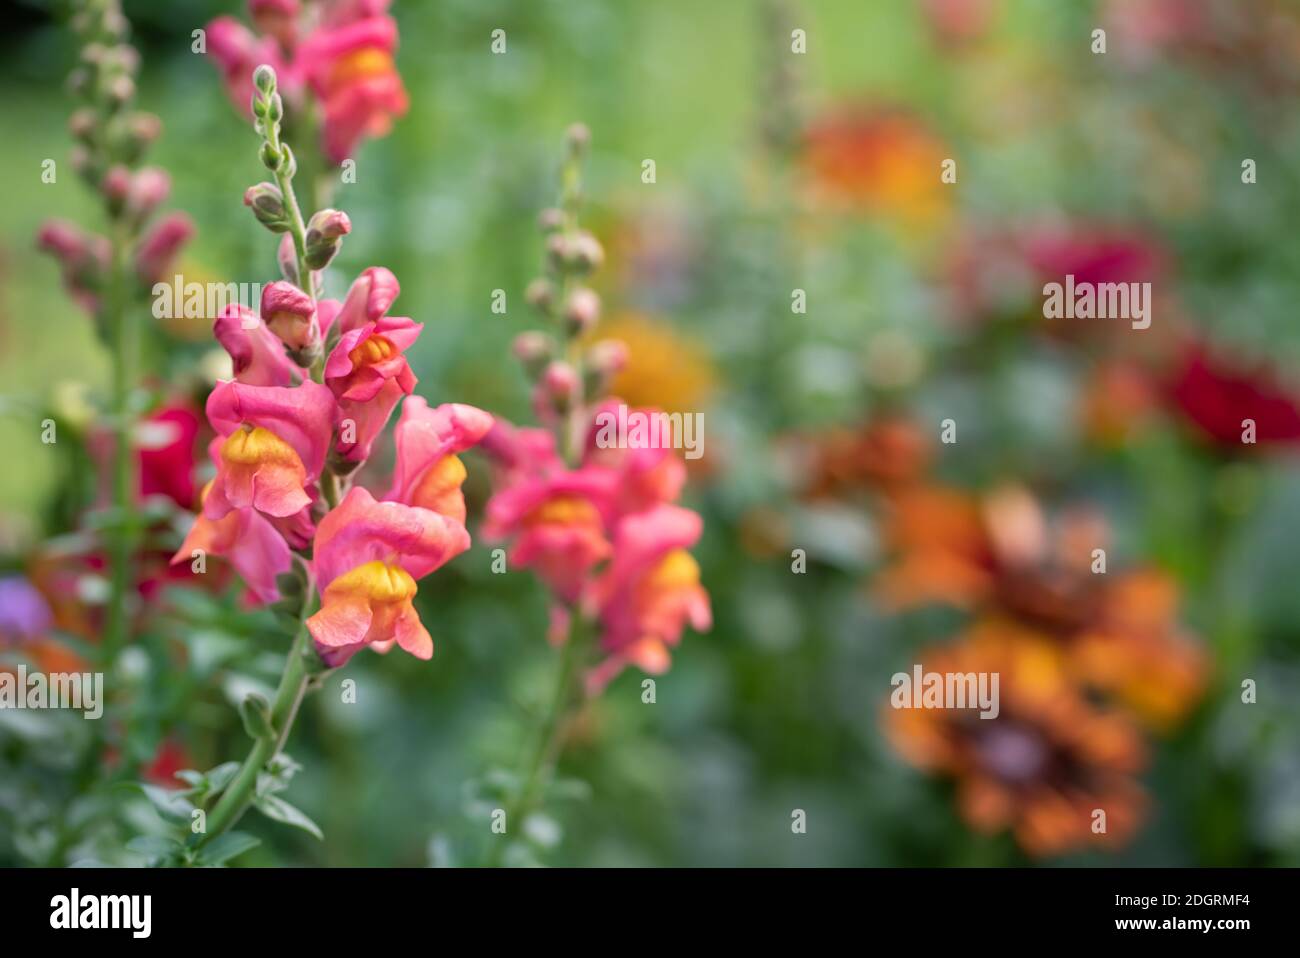 Purple antirrhinum or dragon flowers or snapdragons in a green flowers garden Stock Photo